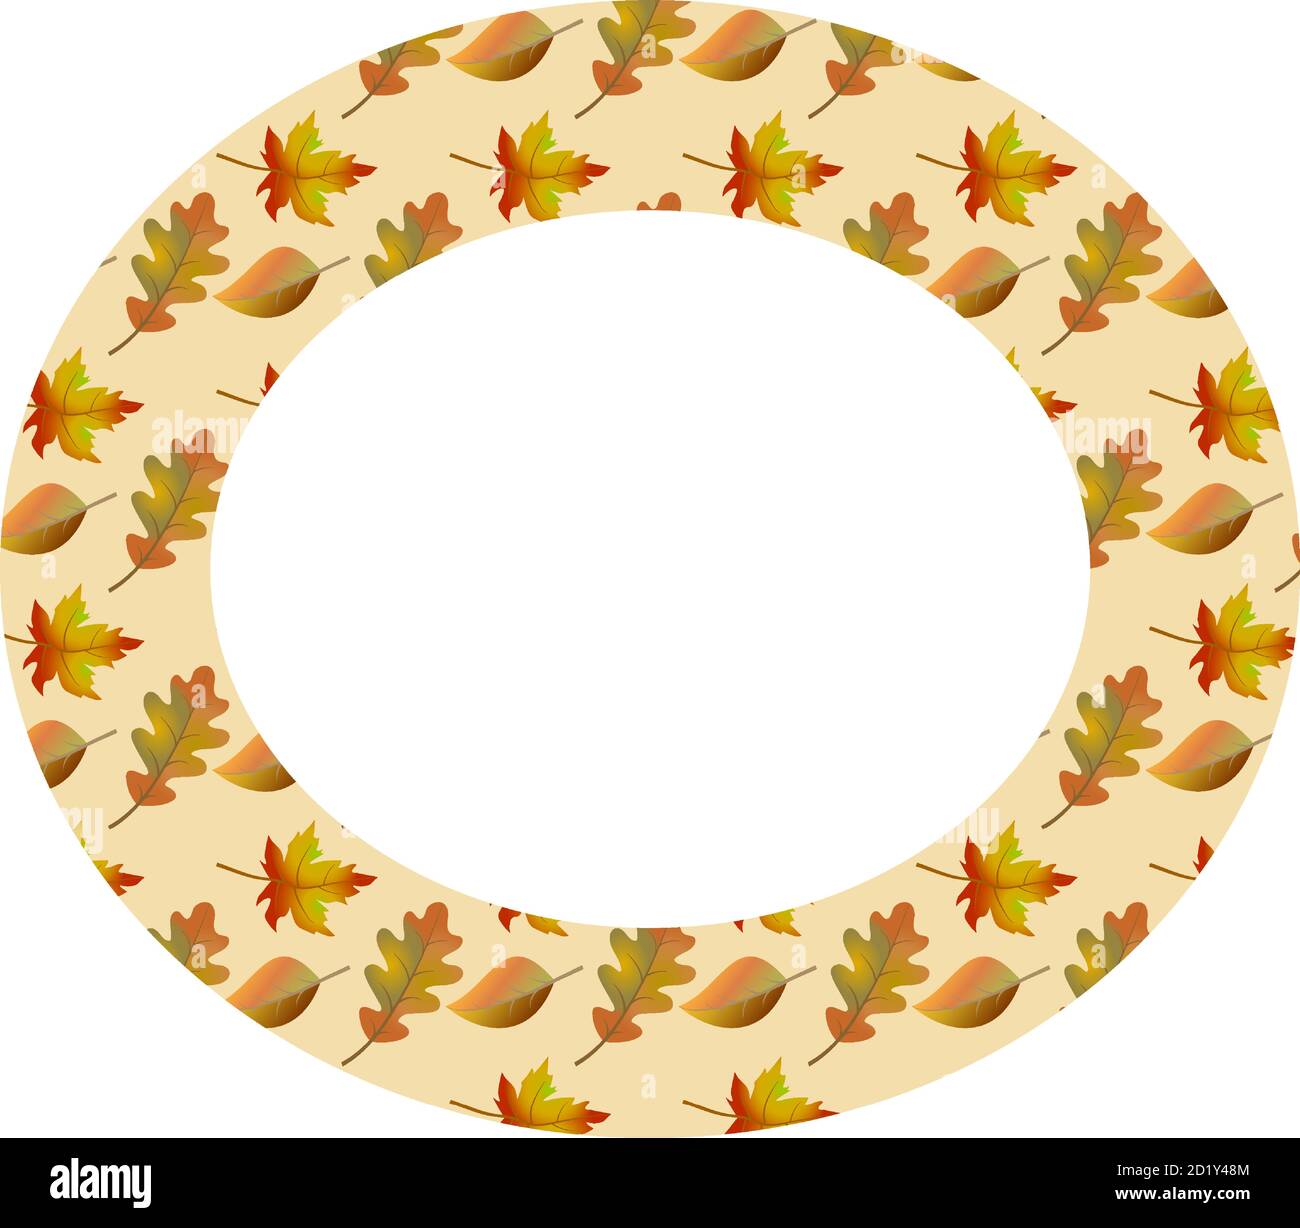 Autumn pattern with maple, oak and birch leaves and beige background Stock Vector